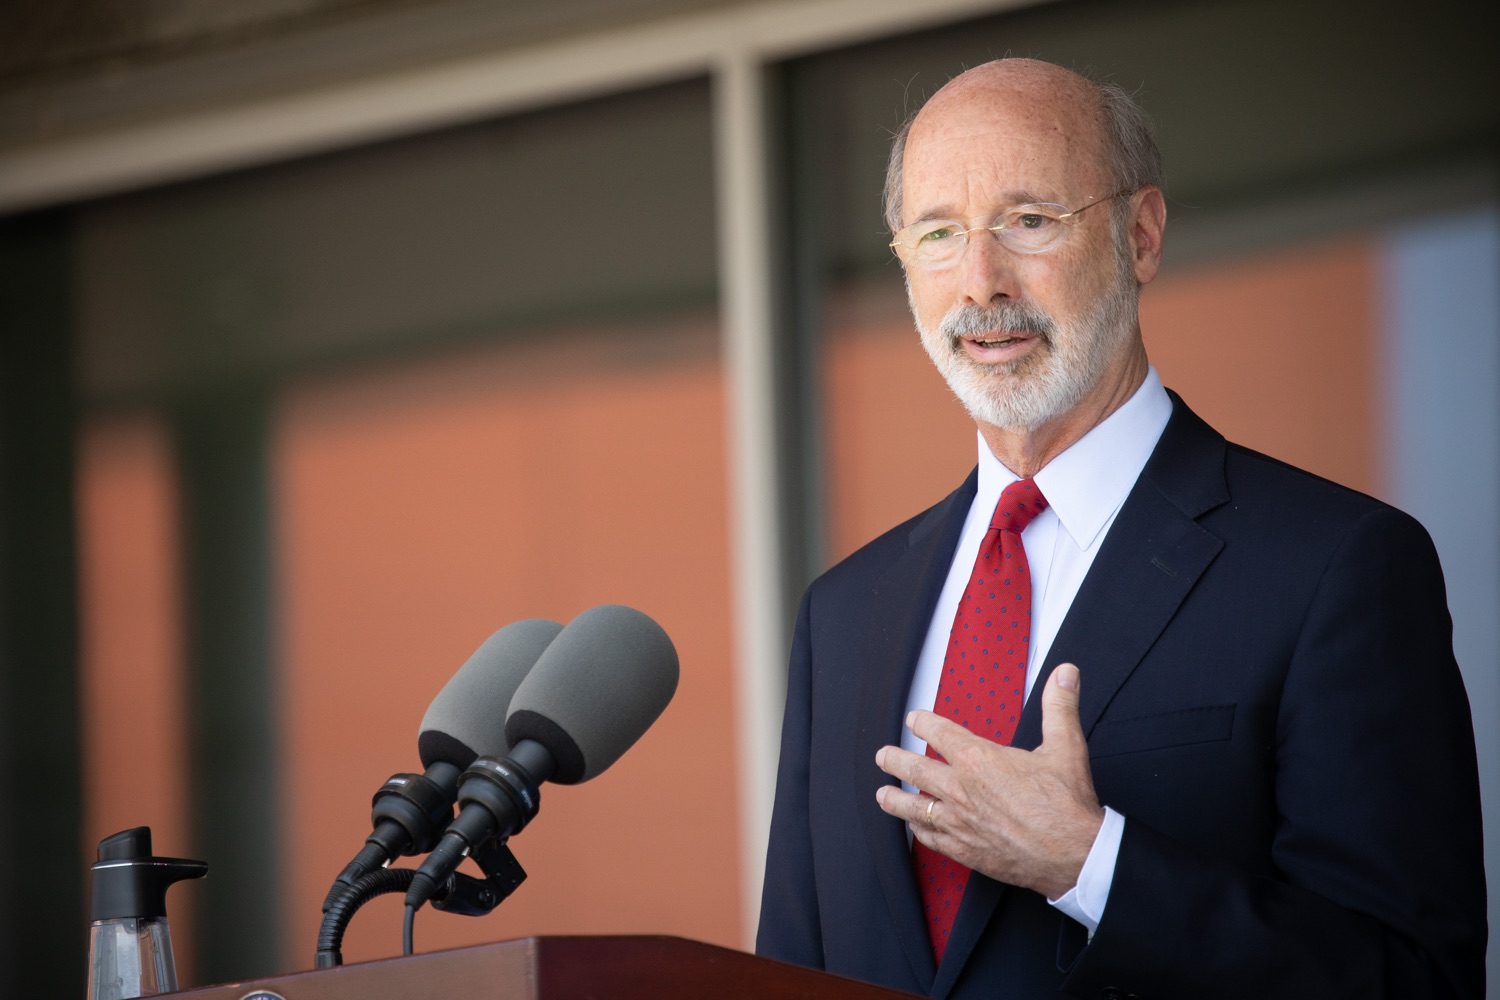 Pennsylvania Governor Tom Wolf speaking with the press.  Governor Tom Wolf visited the child care center at PSECU headquarters in Harrisburg today to announce $53 million in additional financial support for child care providers that have suffered during COVID-19.  Harrisburg, PA  July 6, 2020..<br><a href="https://filesource.amperwave.net/commonwealthofpa/photo/18143_gov_cares_dz_06.jpg" target="_blank">⇣ Download Photo</a>